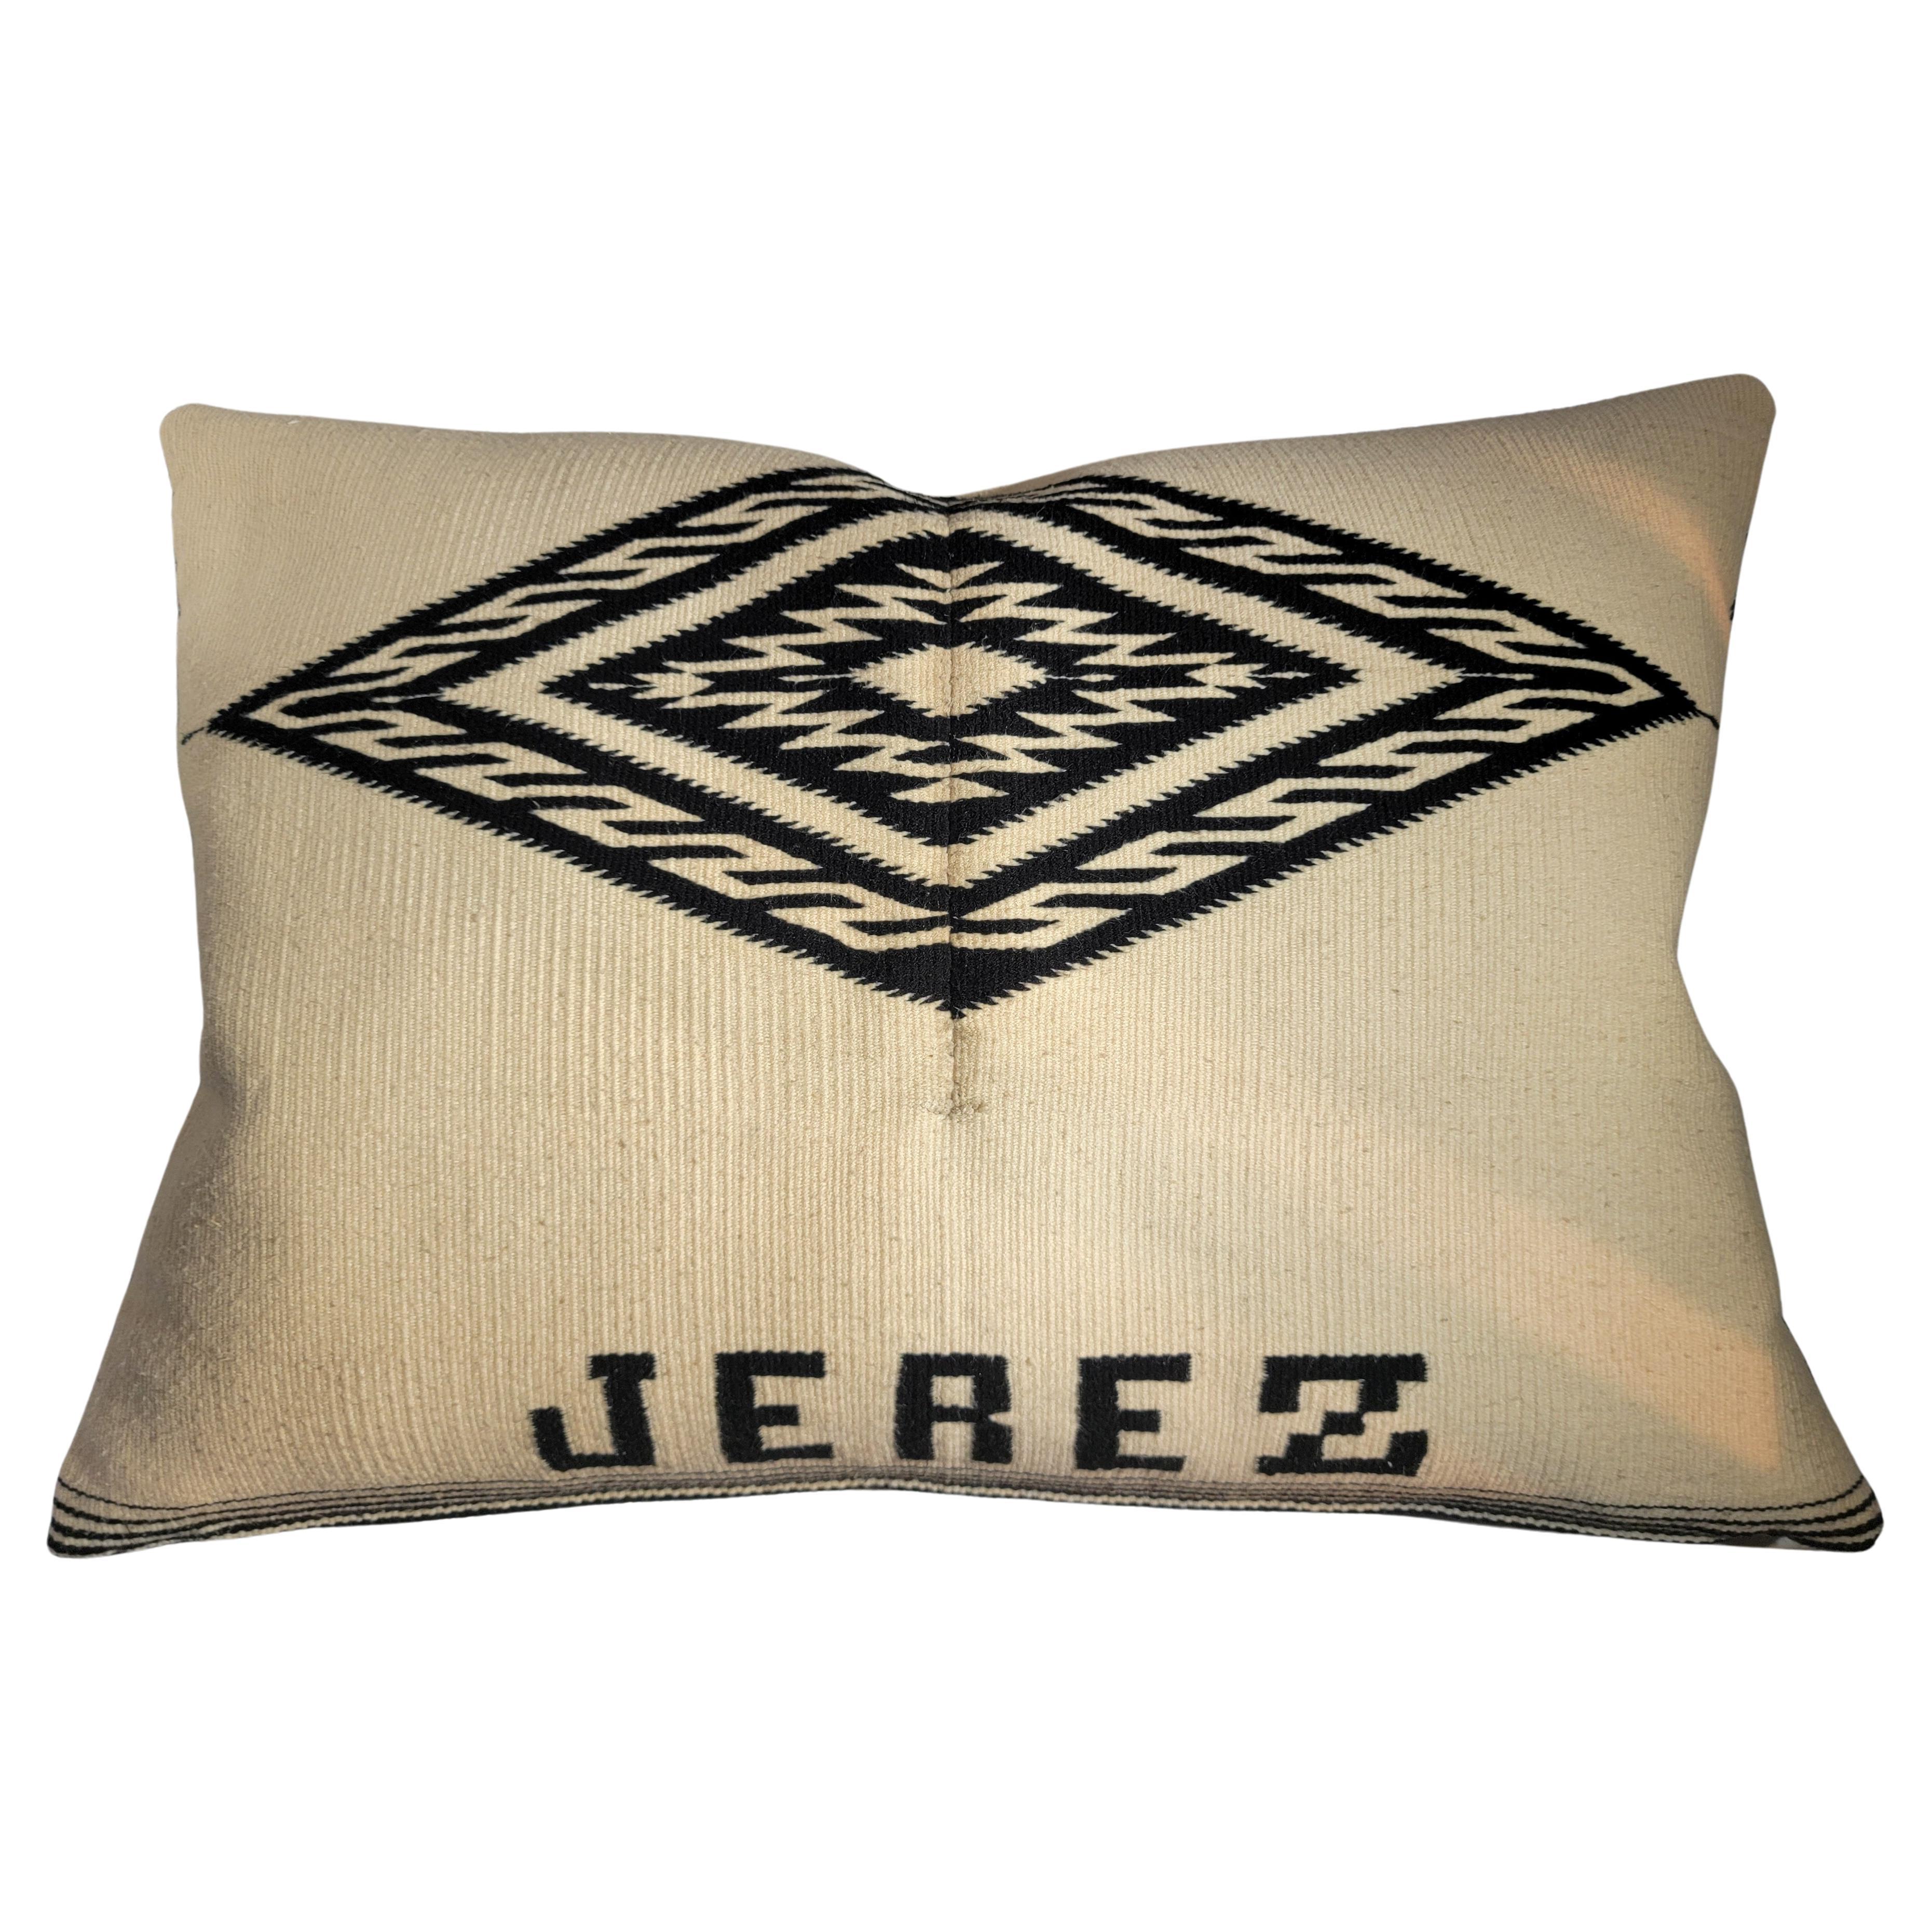 1960s Mexican Indian Weaving Pillow " Jerez"